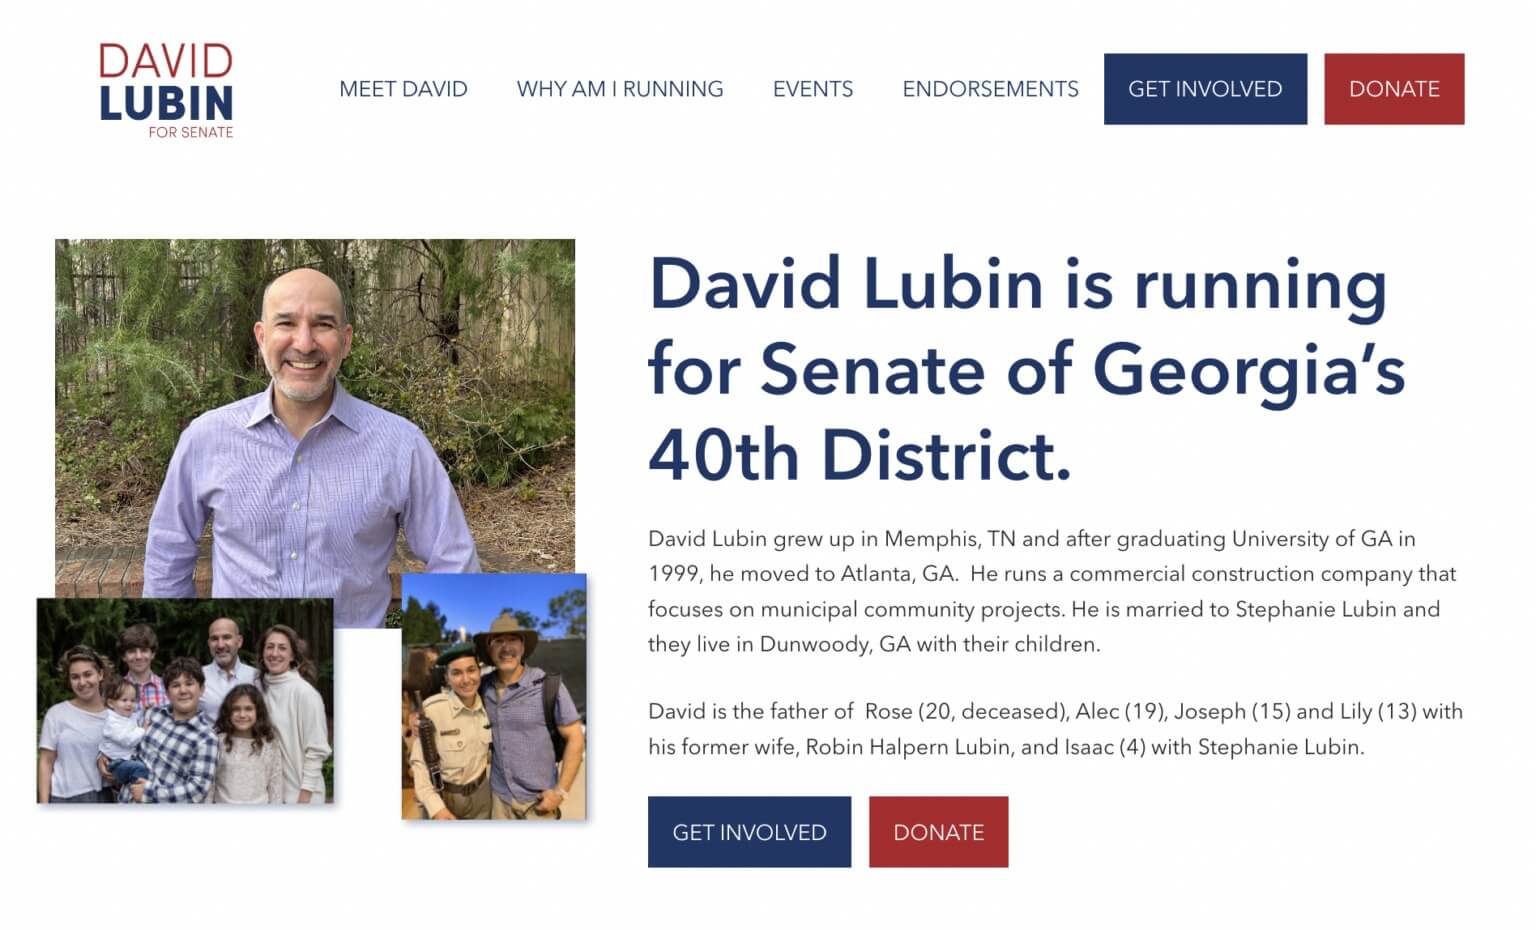 David Lubin is running for state Senate in Georgia. His daughter Rose, who was killed in a terror attack in Jerusalem in 2023, is visible in the family photo on his campaign website. 